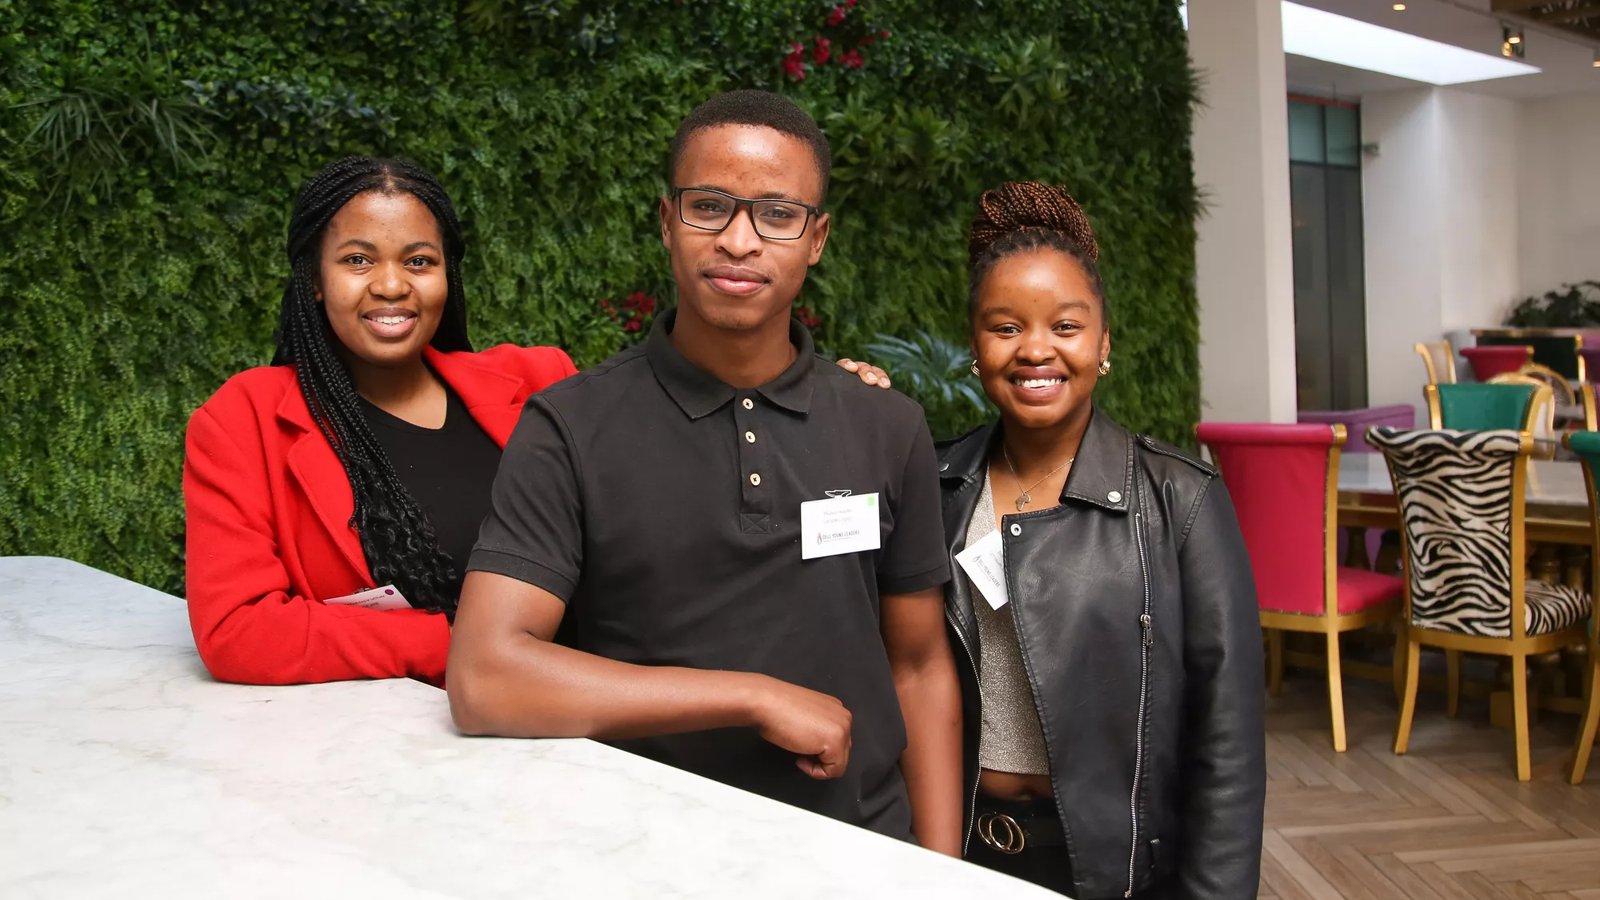 Three Dell Young Leaders alumni at the Dell Young Leaders Alumni Networking Event in Johannesburg on July 8, 2023. One male alum in the center, two women on either side smiling.